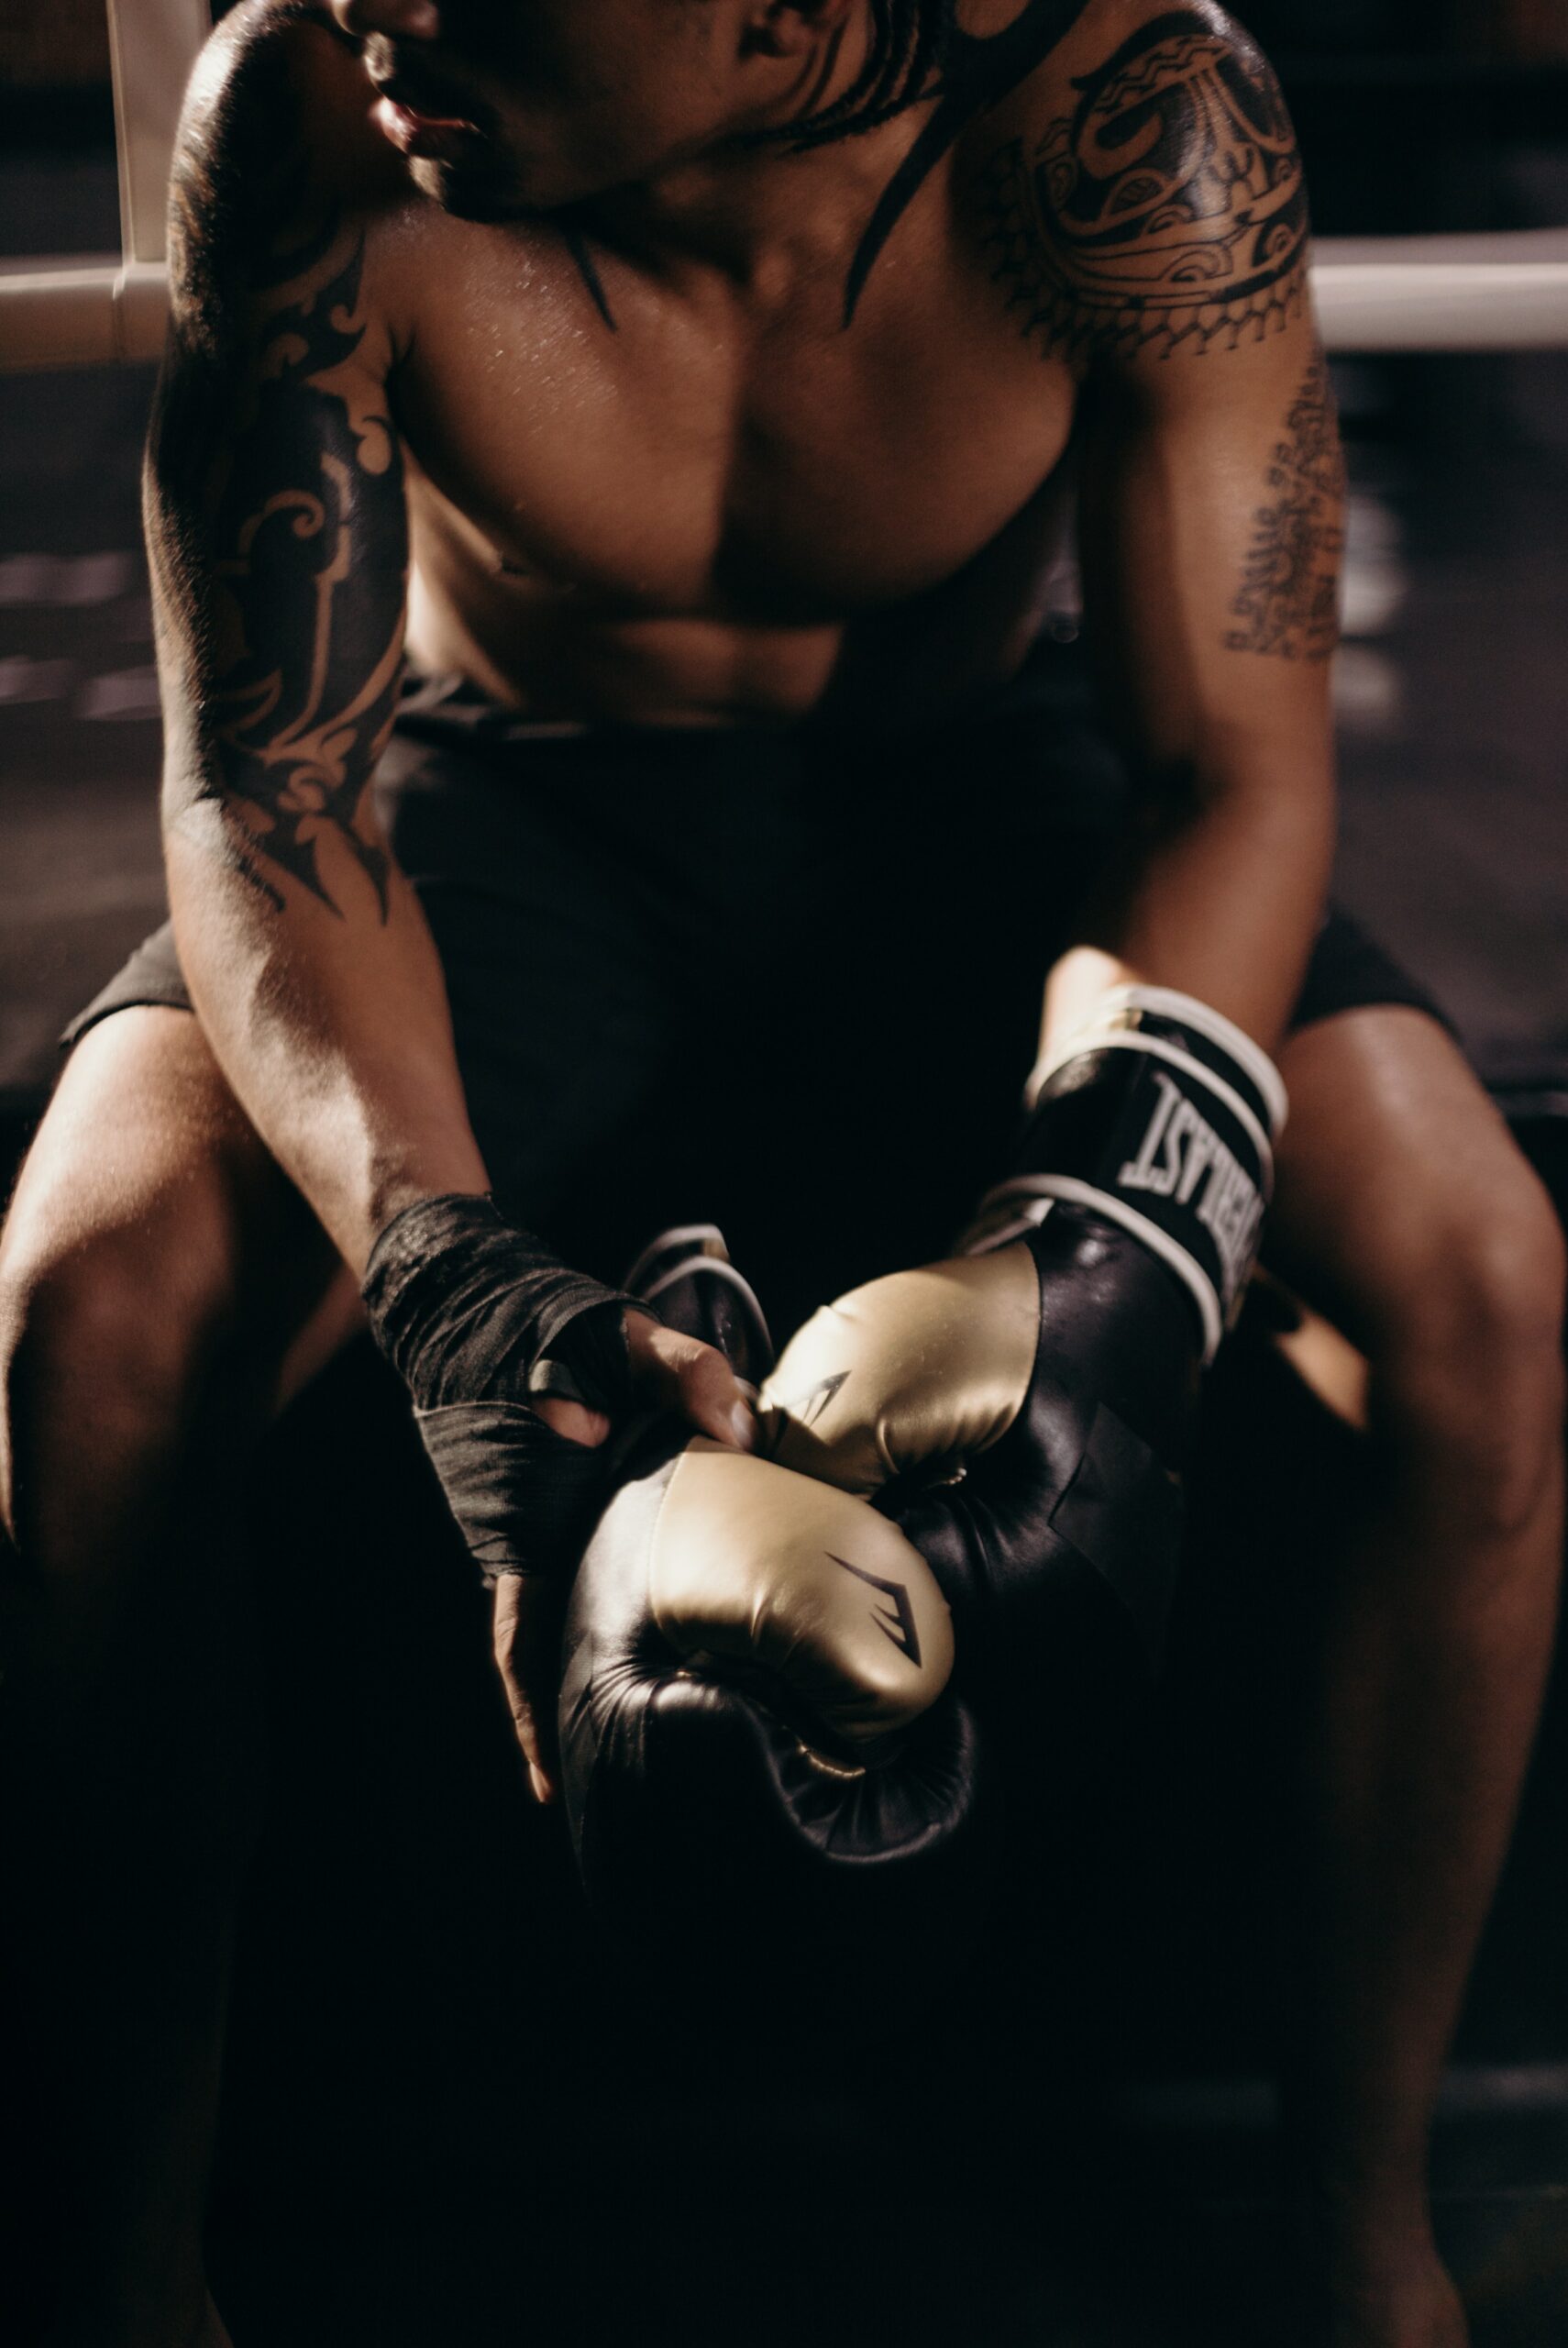 A boxer resting after a training session wearing Everlast boxing gloves